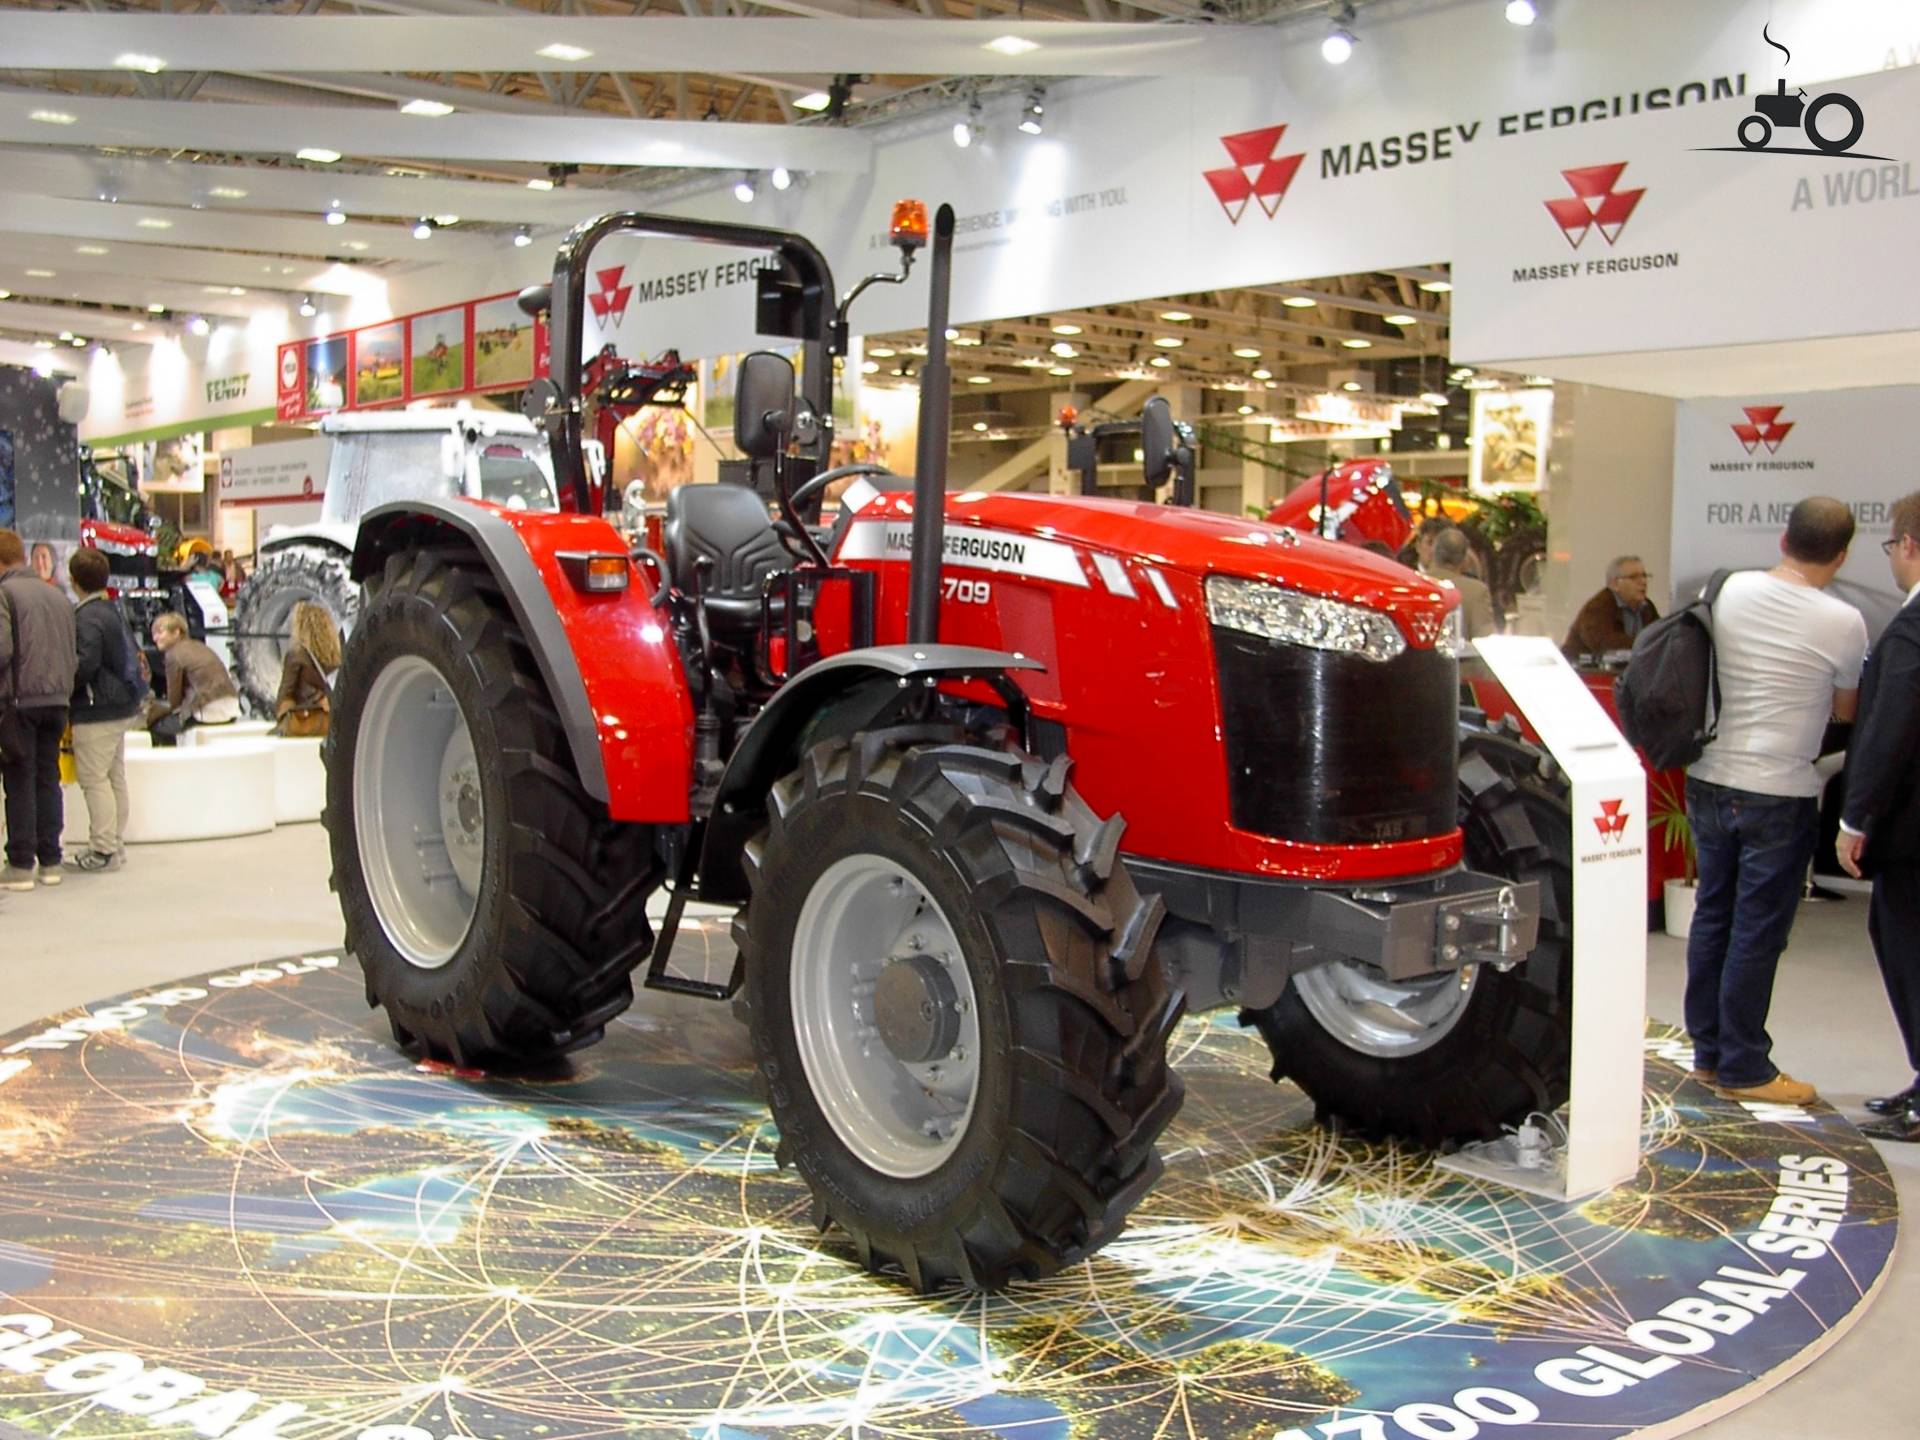 Massey Ferguson 4709 | Picture made by collin ihfan